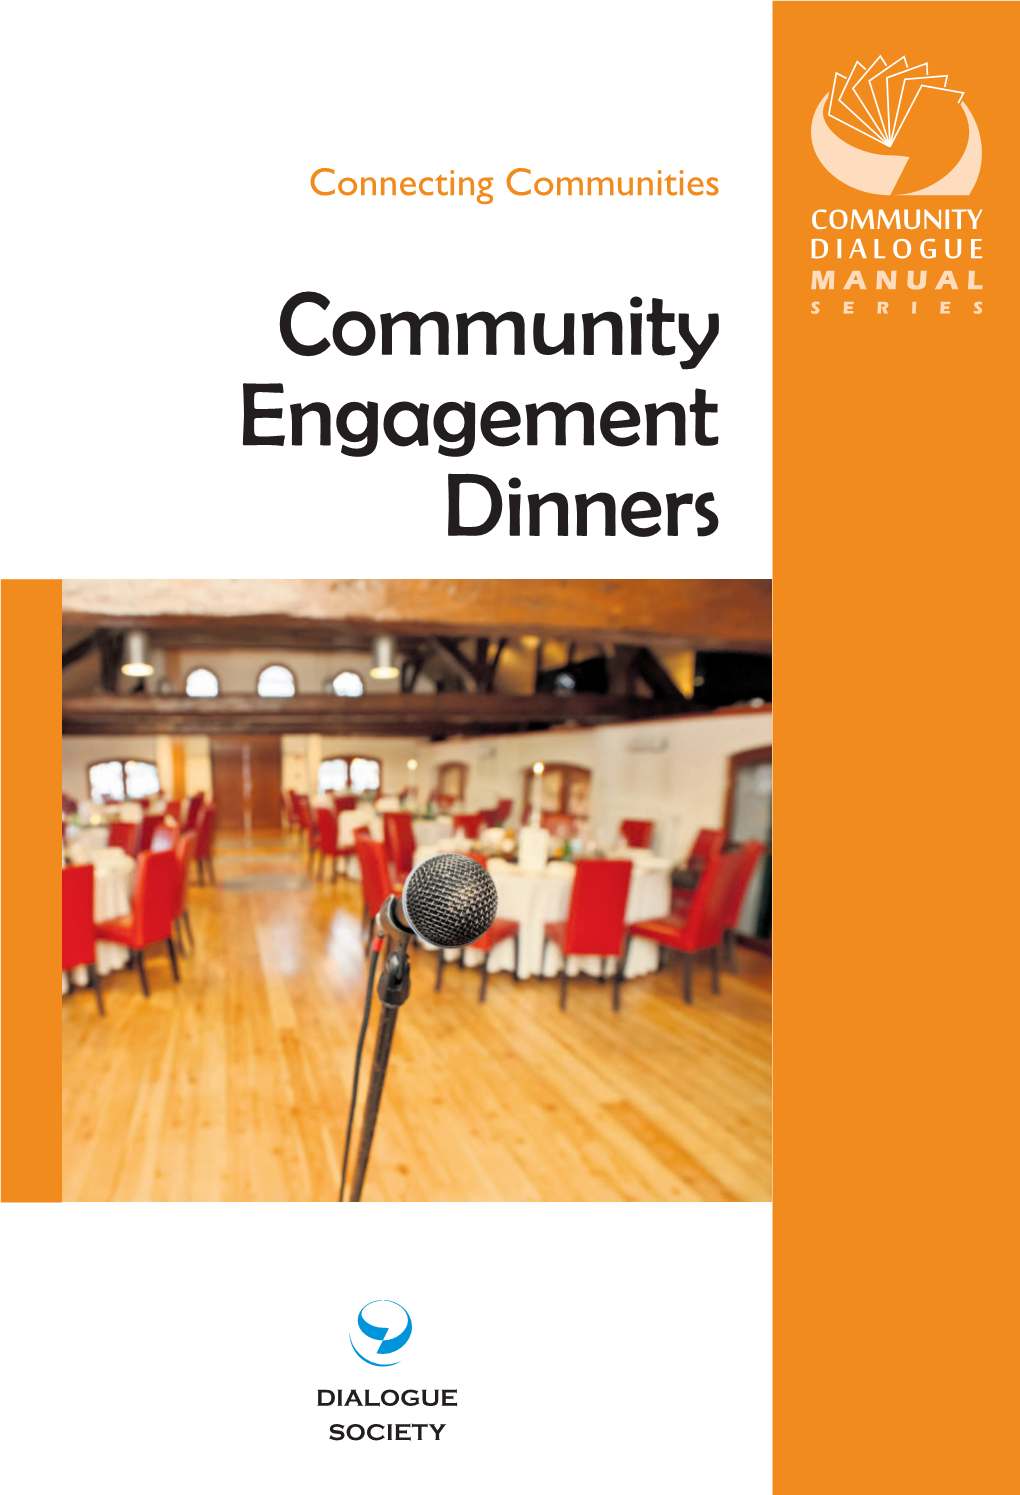 Community Engagement Dinners to Readers of This Manual